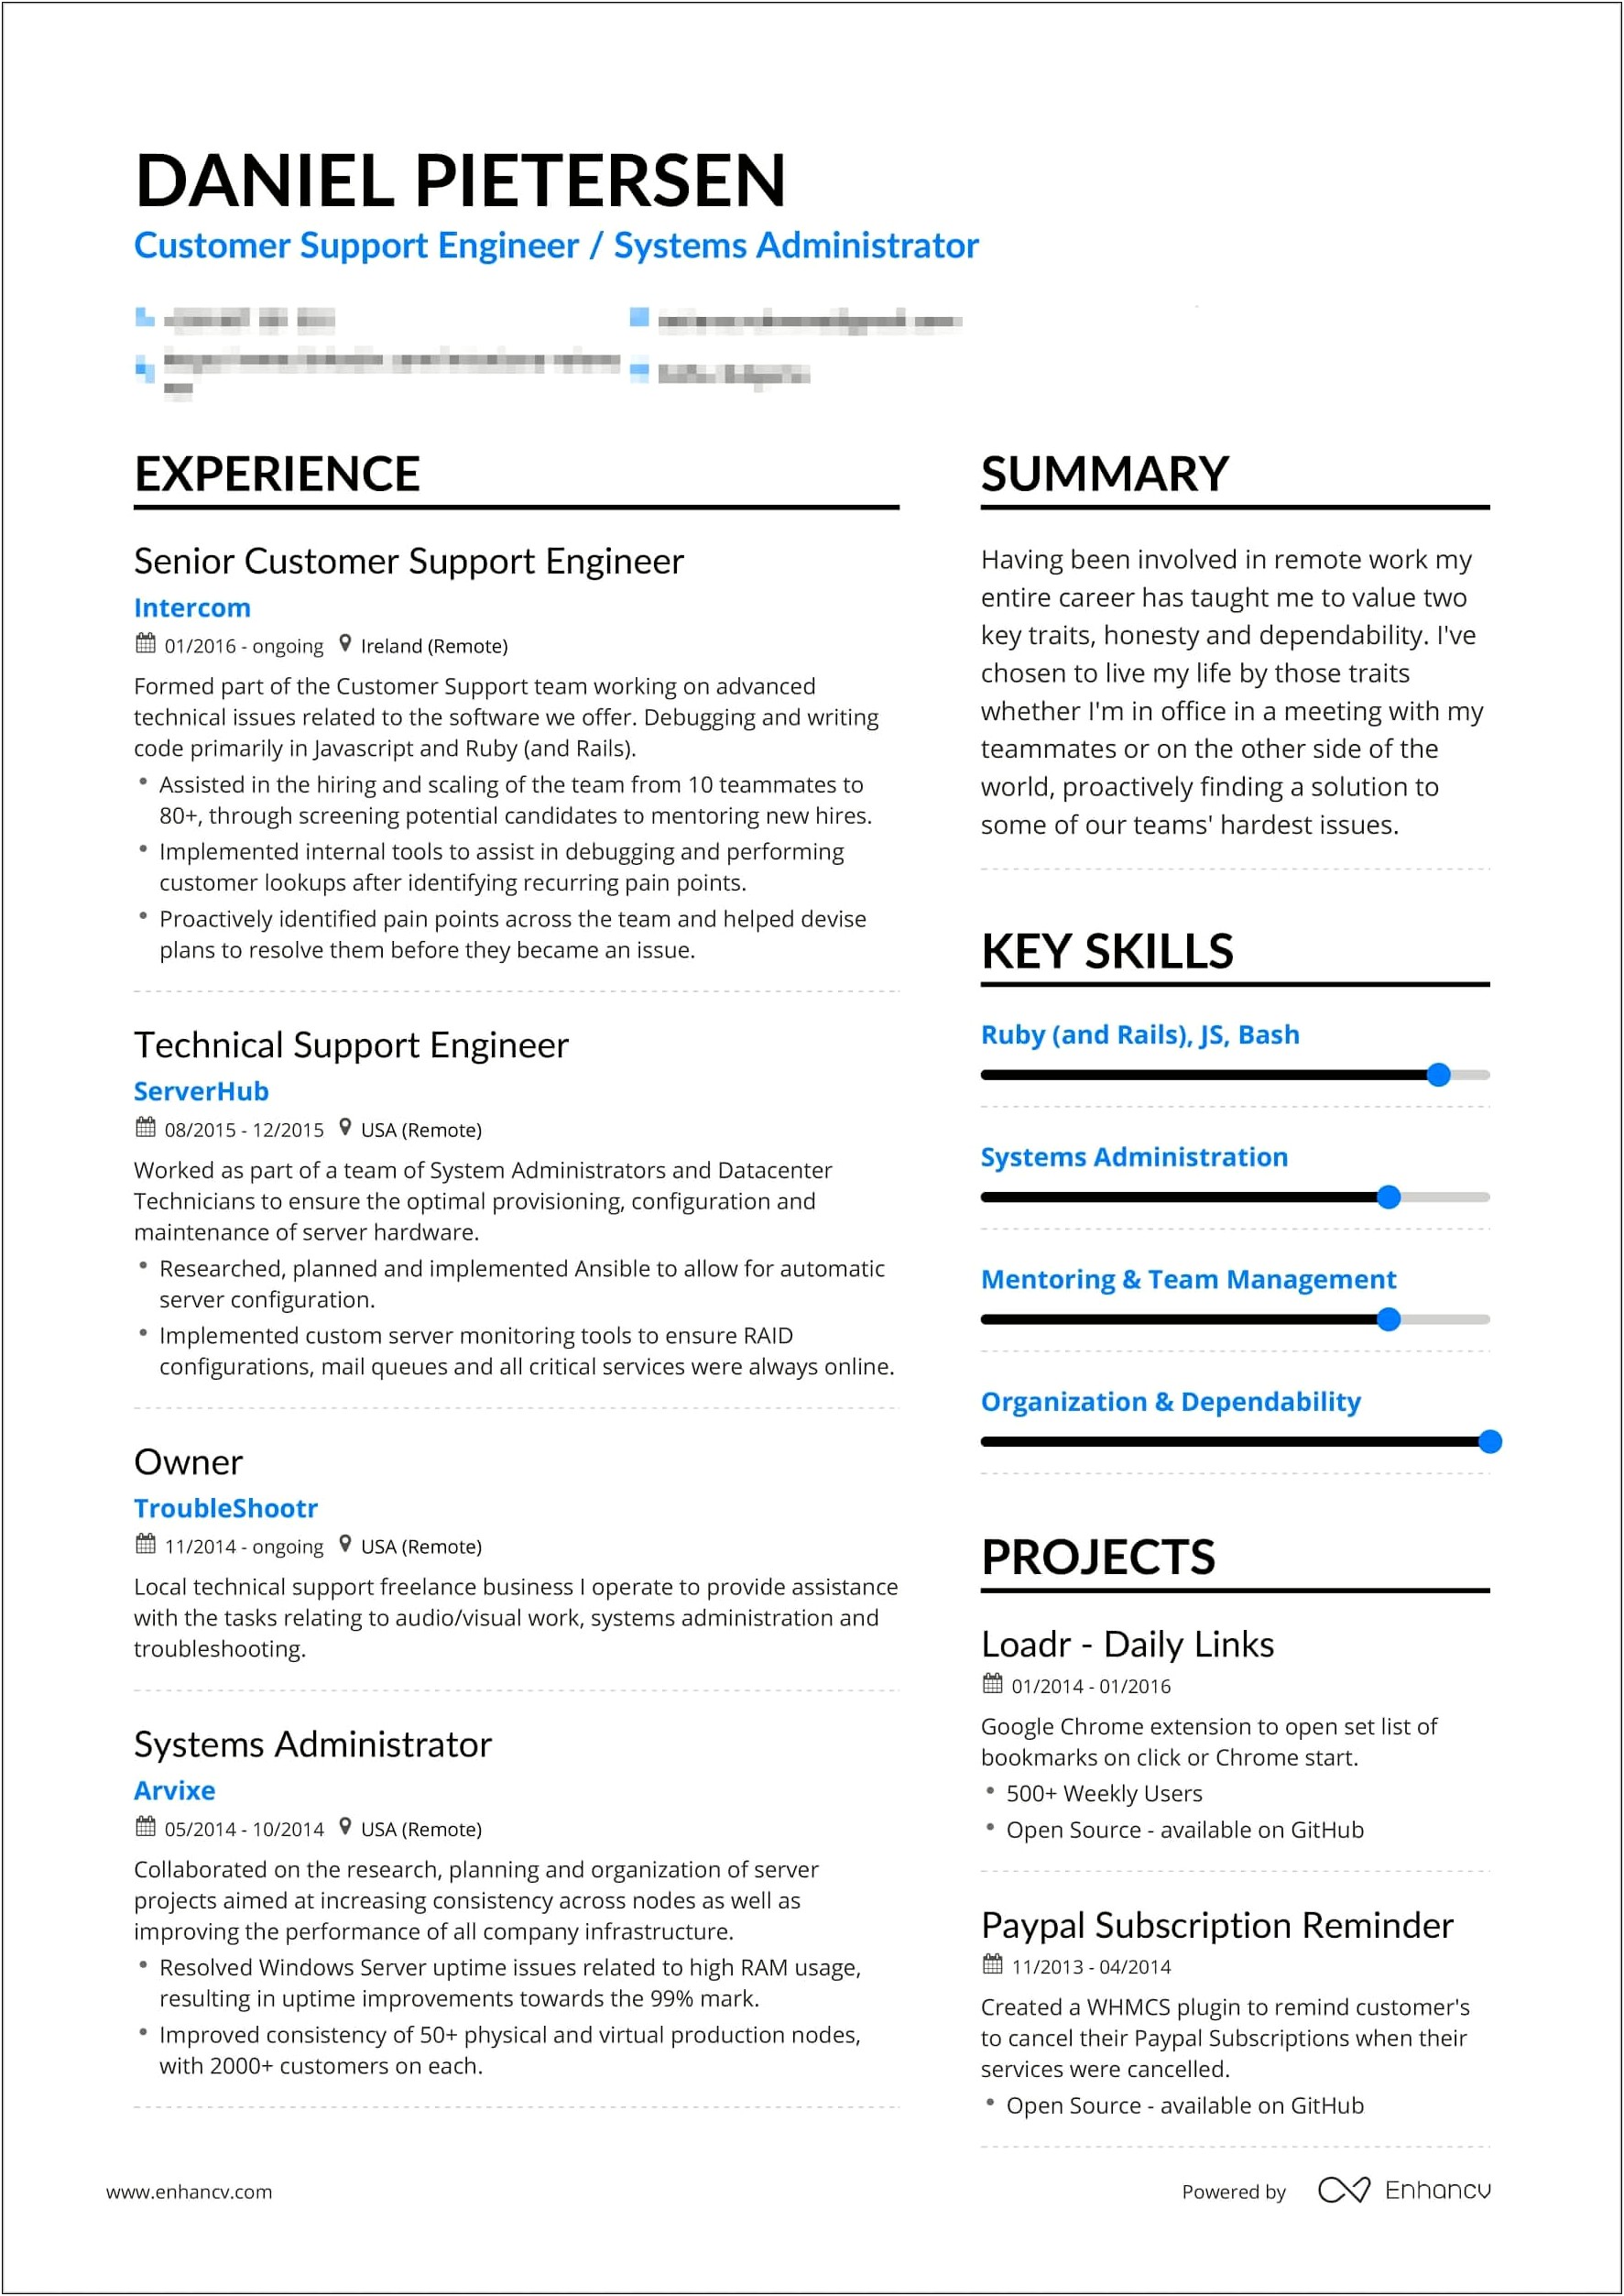 Resume Havent Used Skill In Years